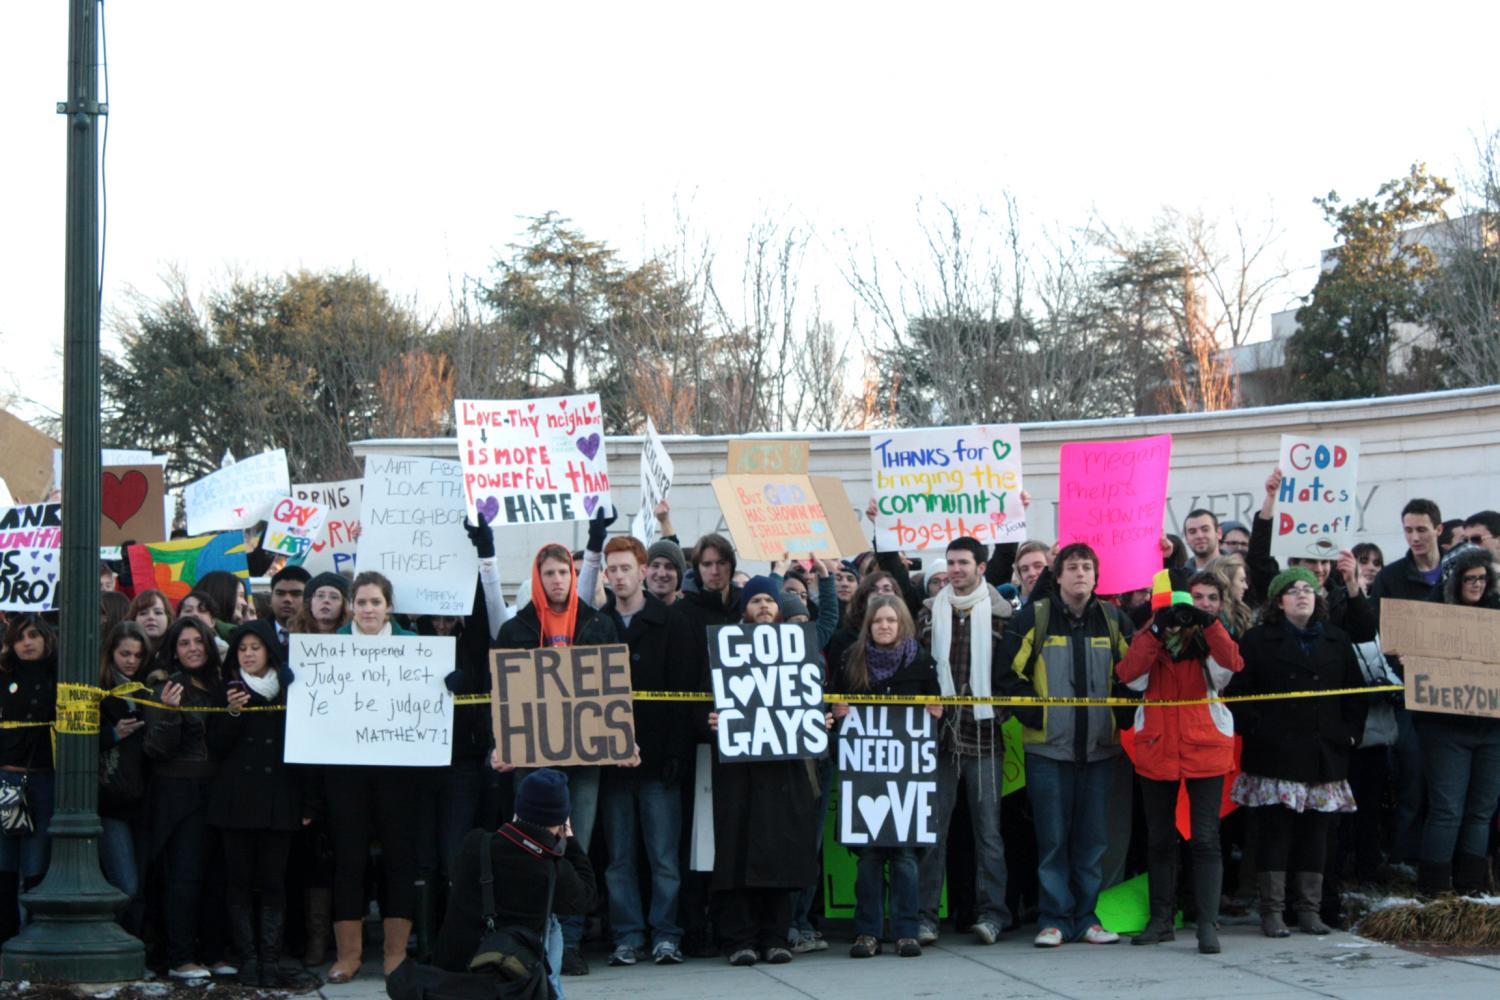 Quotes+from+the+Westboro+Baptist+Church+Rally